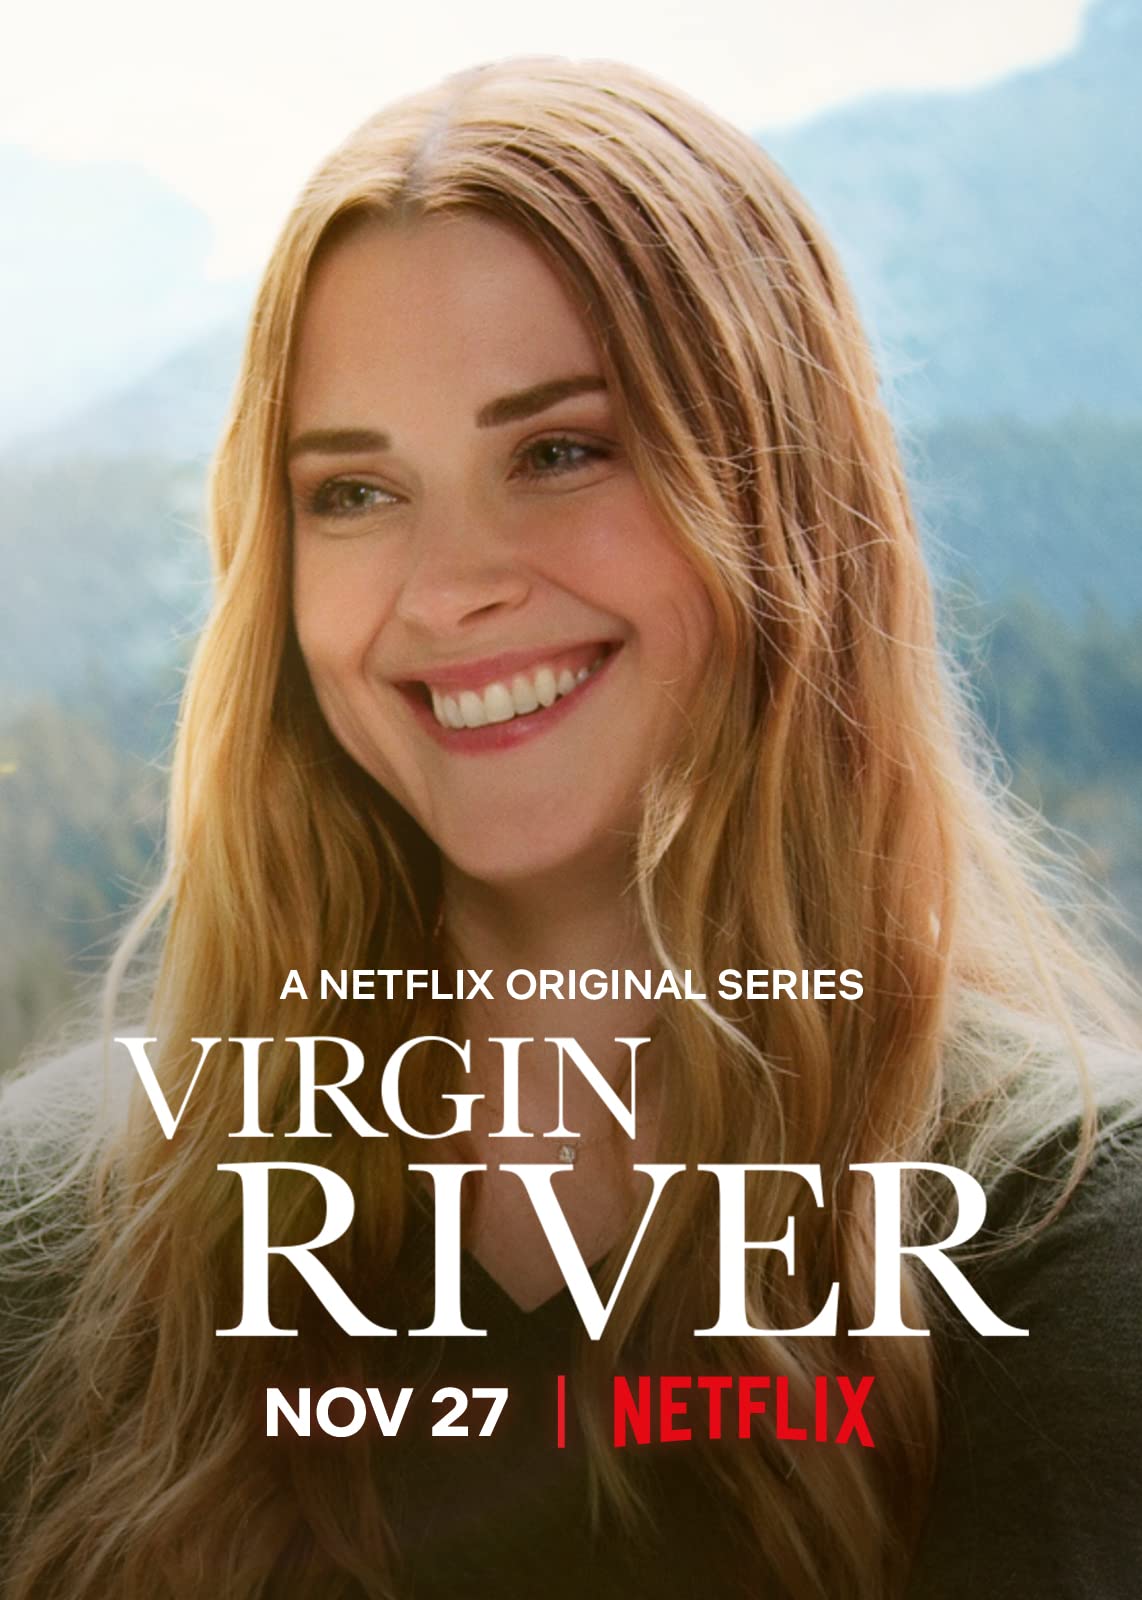 You are currently viewing Virgin River 2020 S02 Complete NetFlix Series Dual Audio Hindi+English ESubs 720p HDRip 1.2GB Download & Watch Online